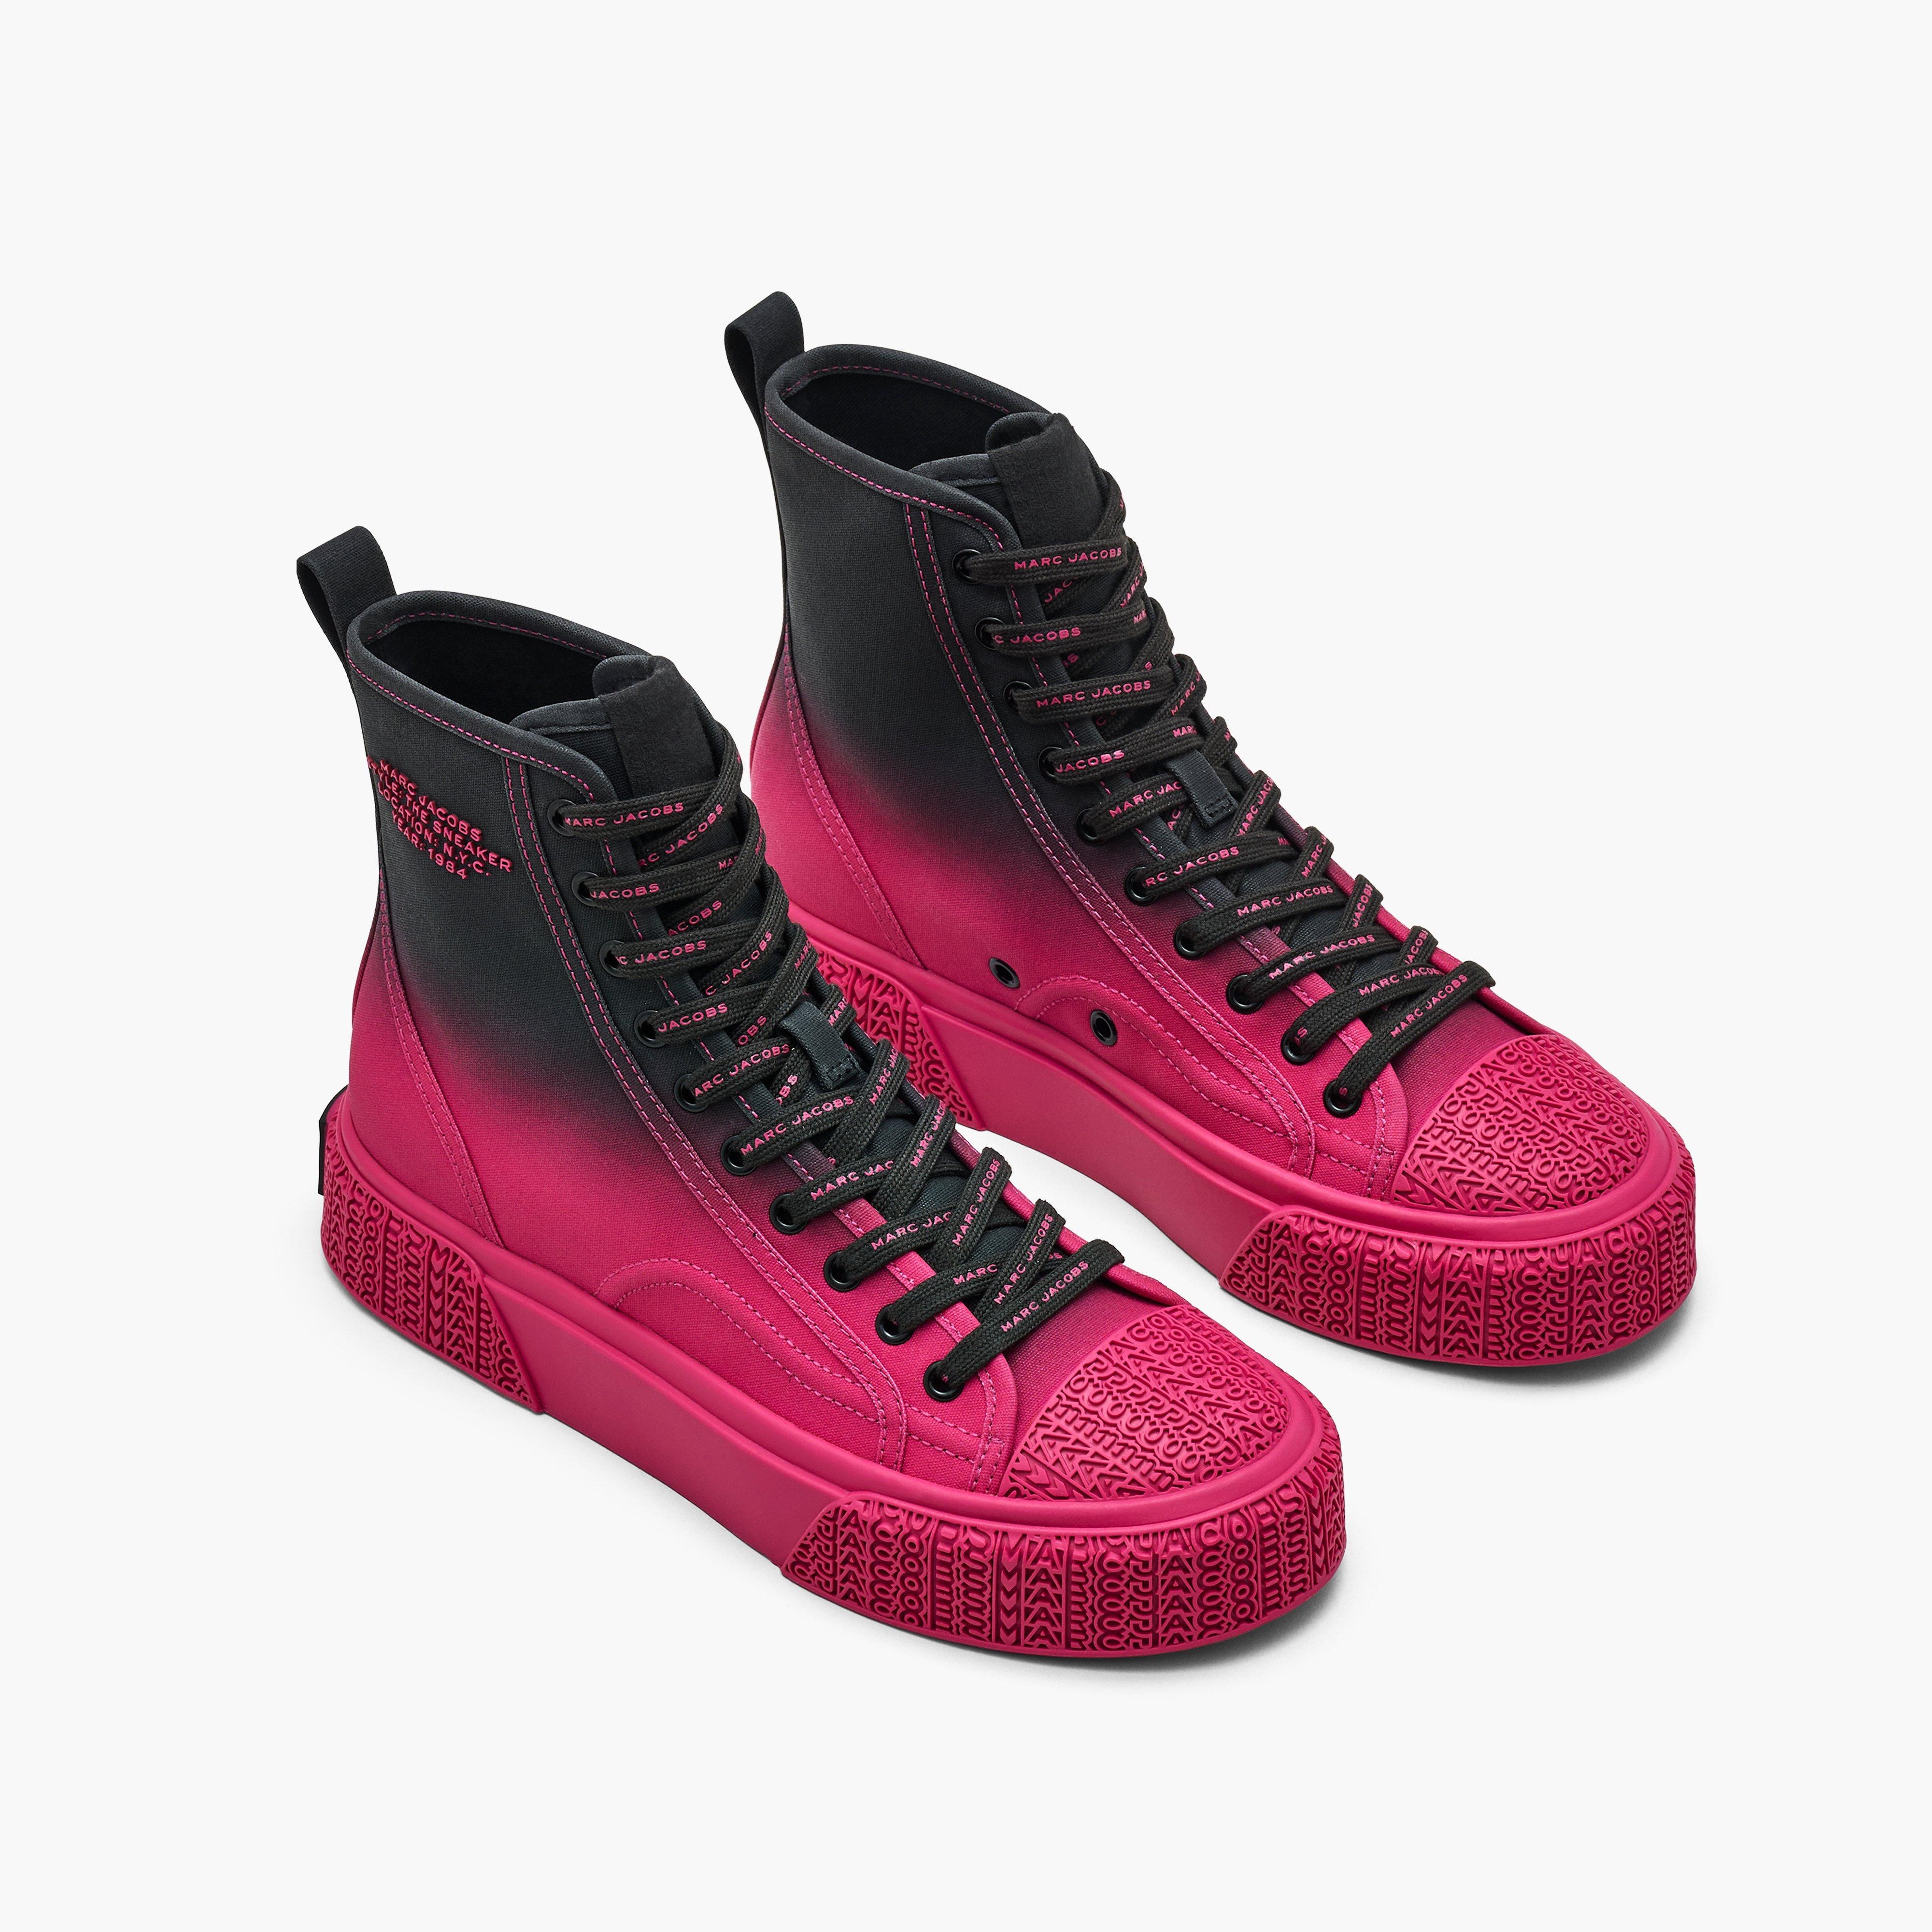 THE OMBRE HIGH TOP SNEAKER - 1